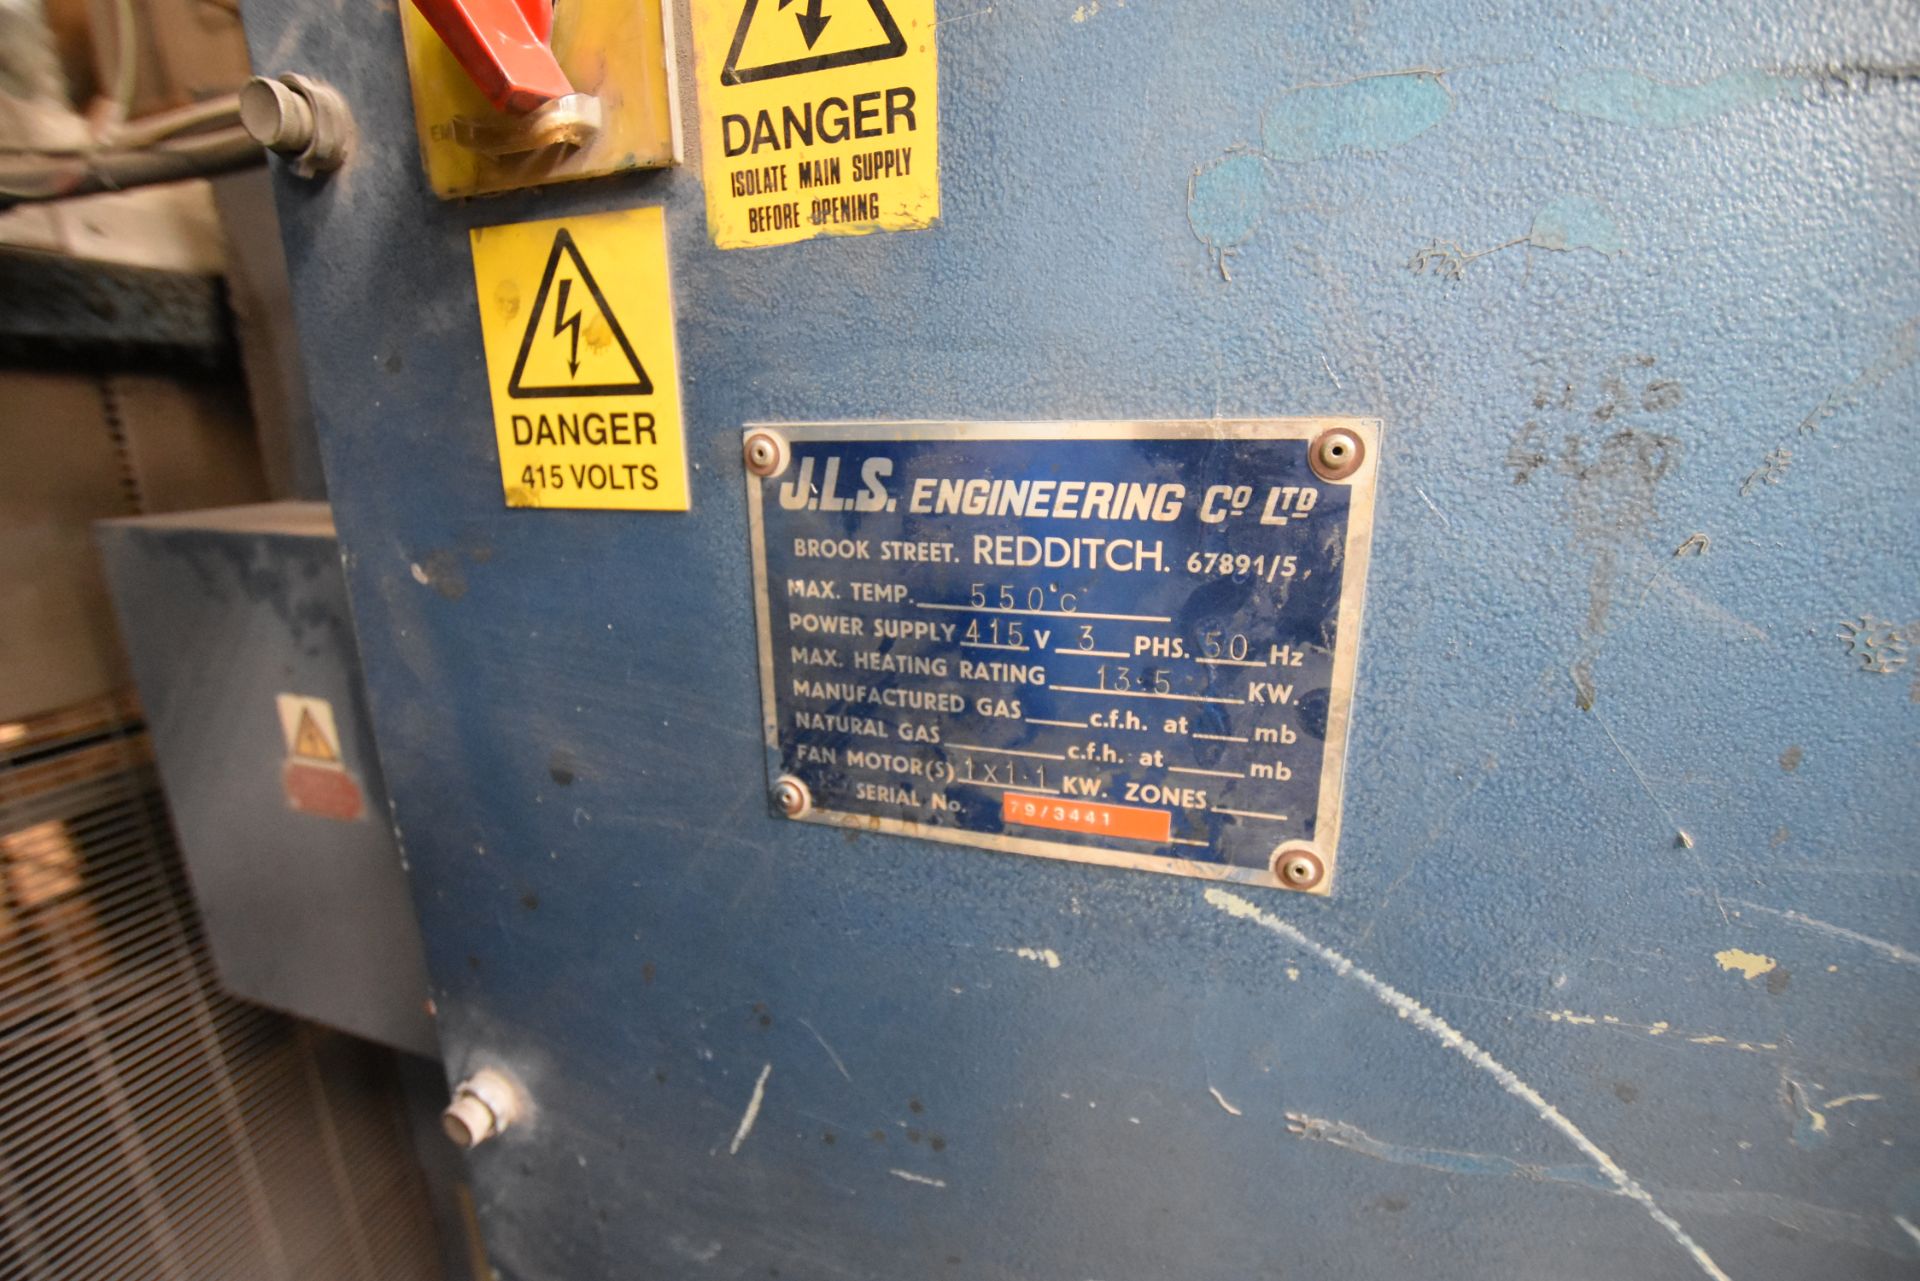 JLS Engineering Electric Batch Type Heat Treatment Oven, 550⁰c max temp, serial number: 79/3441 - Image 2 of 3